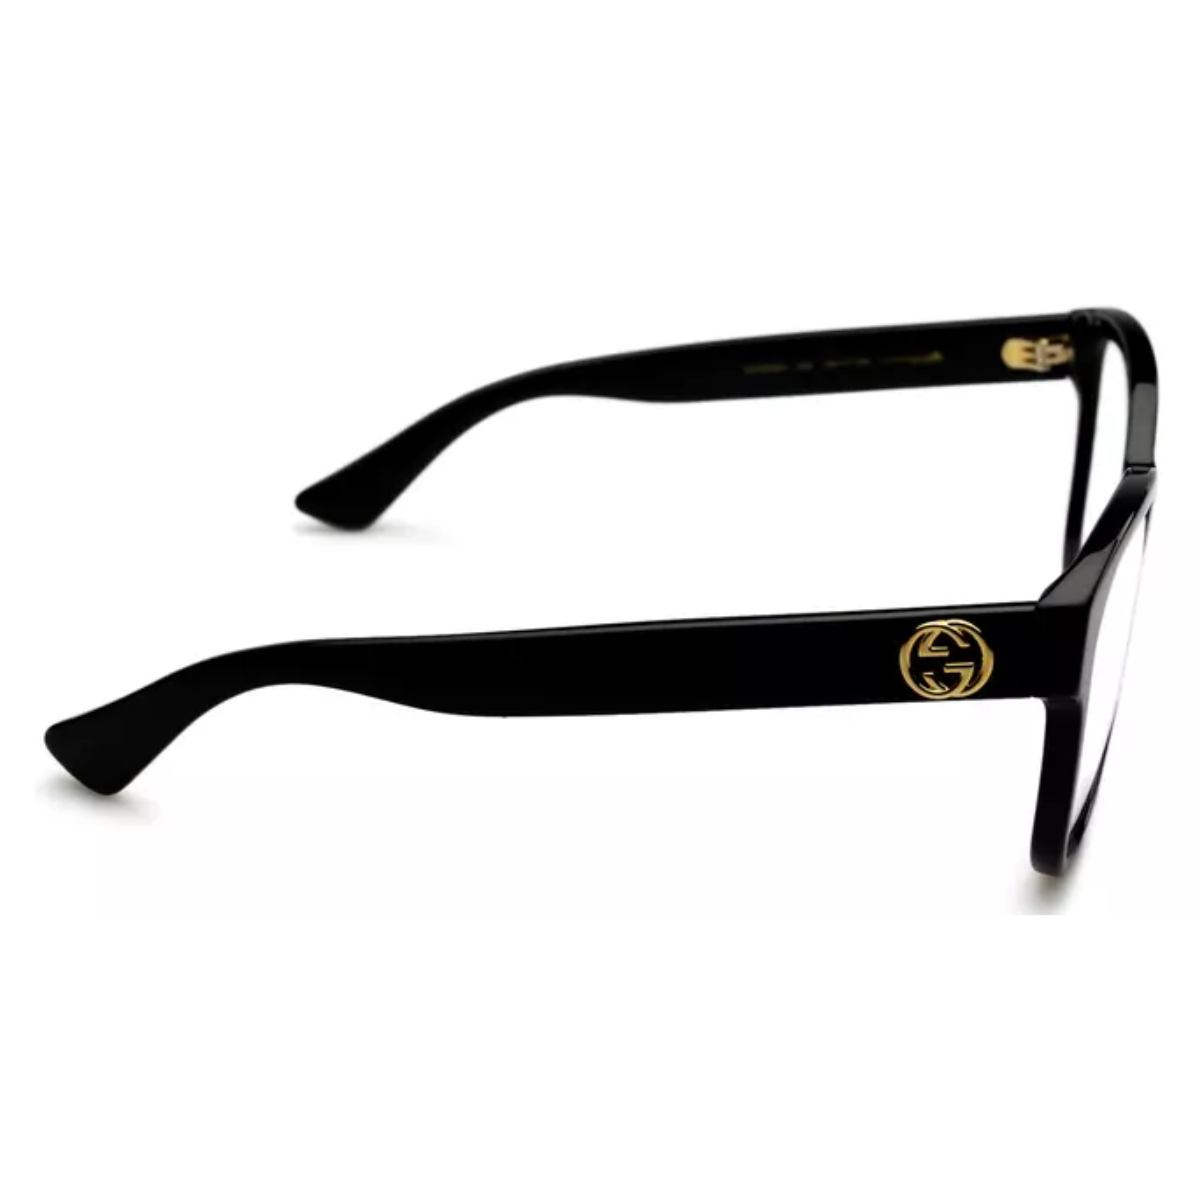 "Discover Gucci 0038O: Stylish Eyewear for Men and Women"